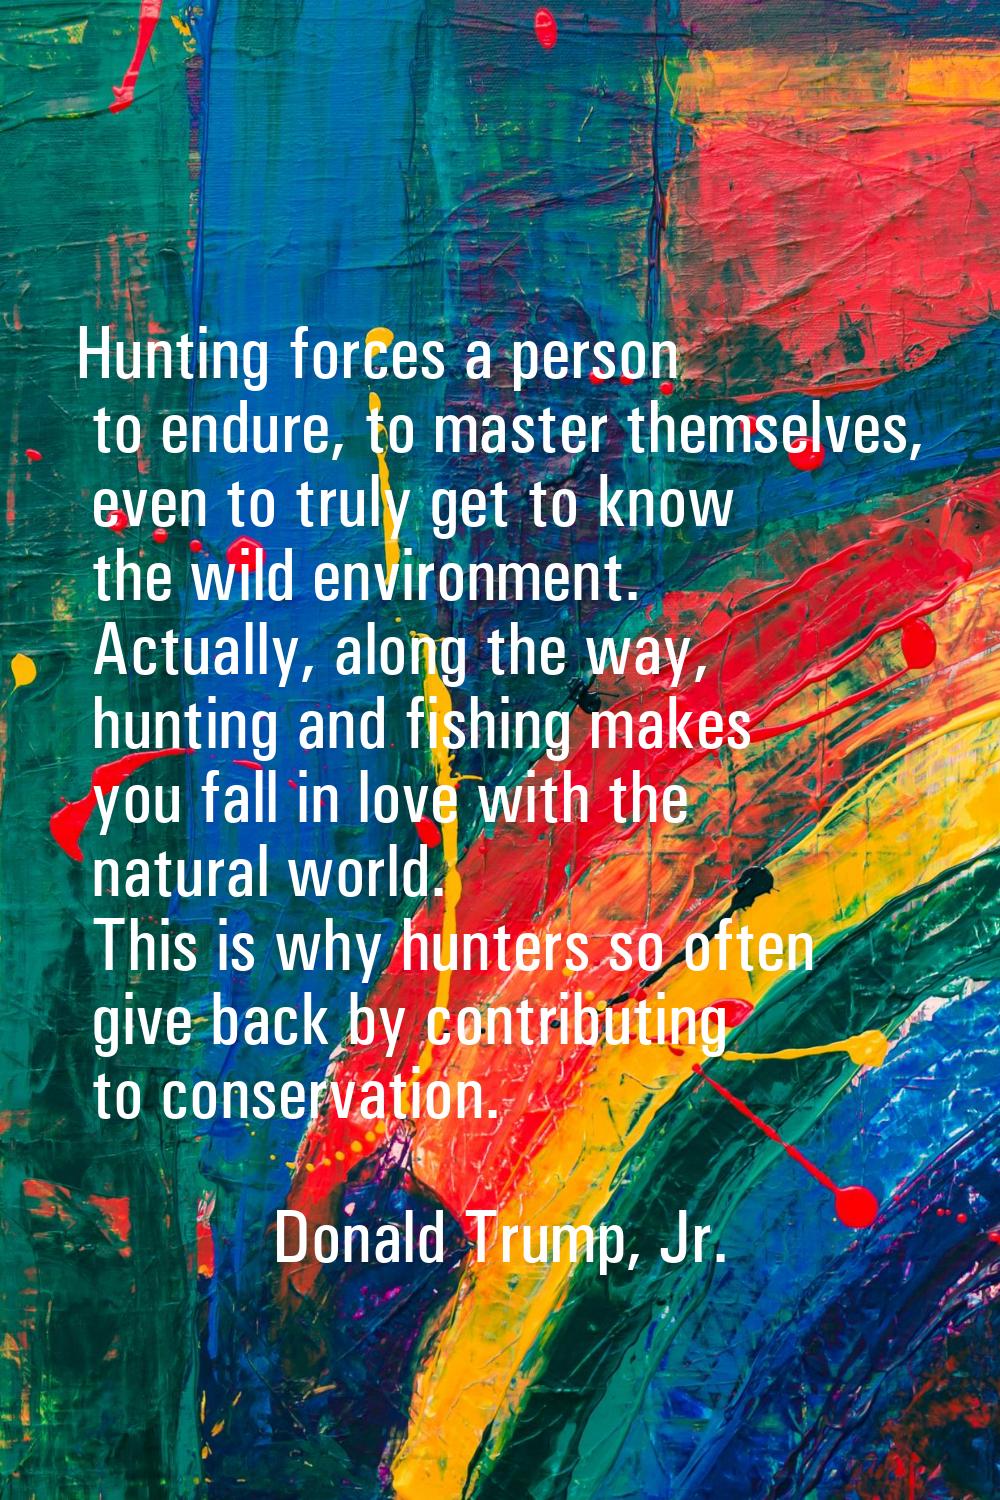 Hunting forces a person to endure, to master themselves, even to truly get to know the wild environ